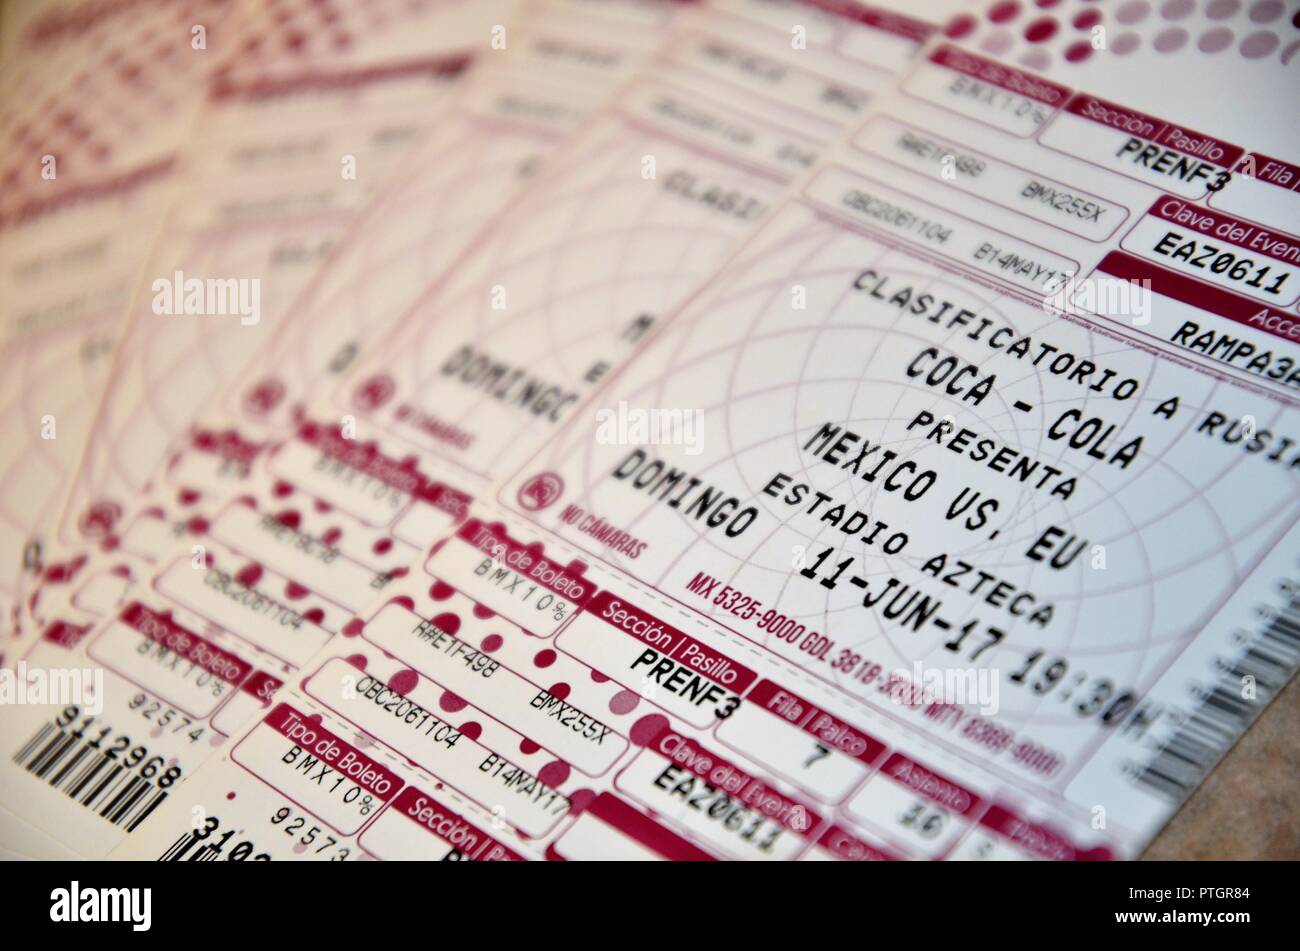 Tickets for the CONCACAF World Cup qualifier game between Mexico and the United States at Azteca Stadium in Mexico City, played June 11, 2017. Stock Photo